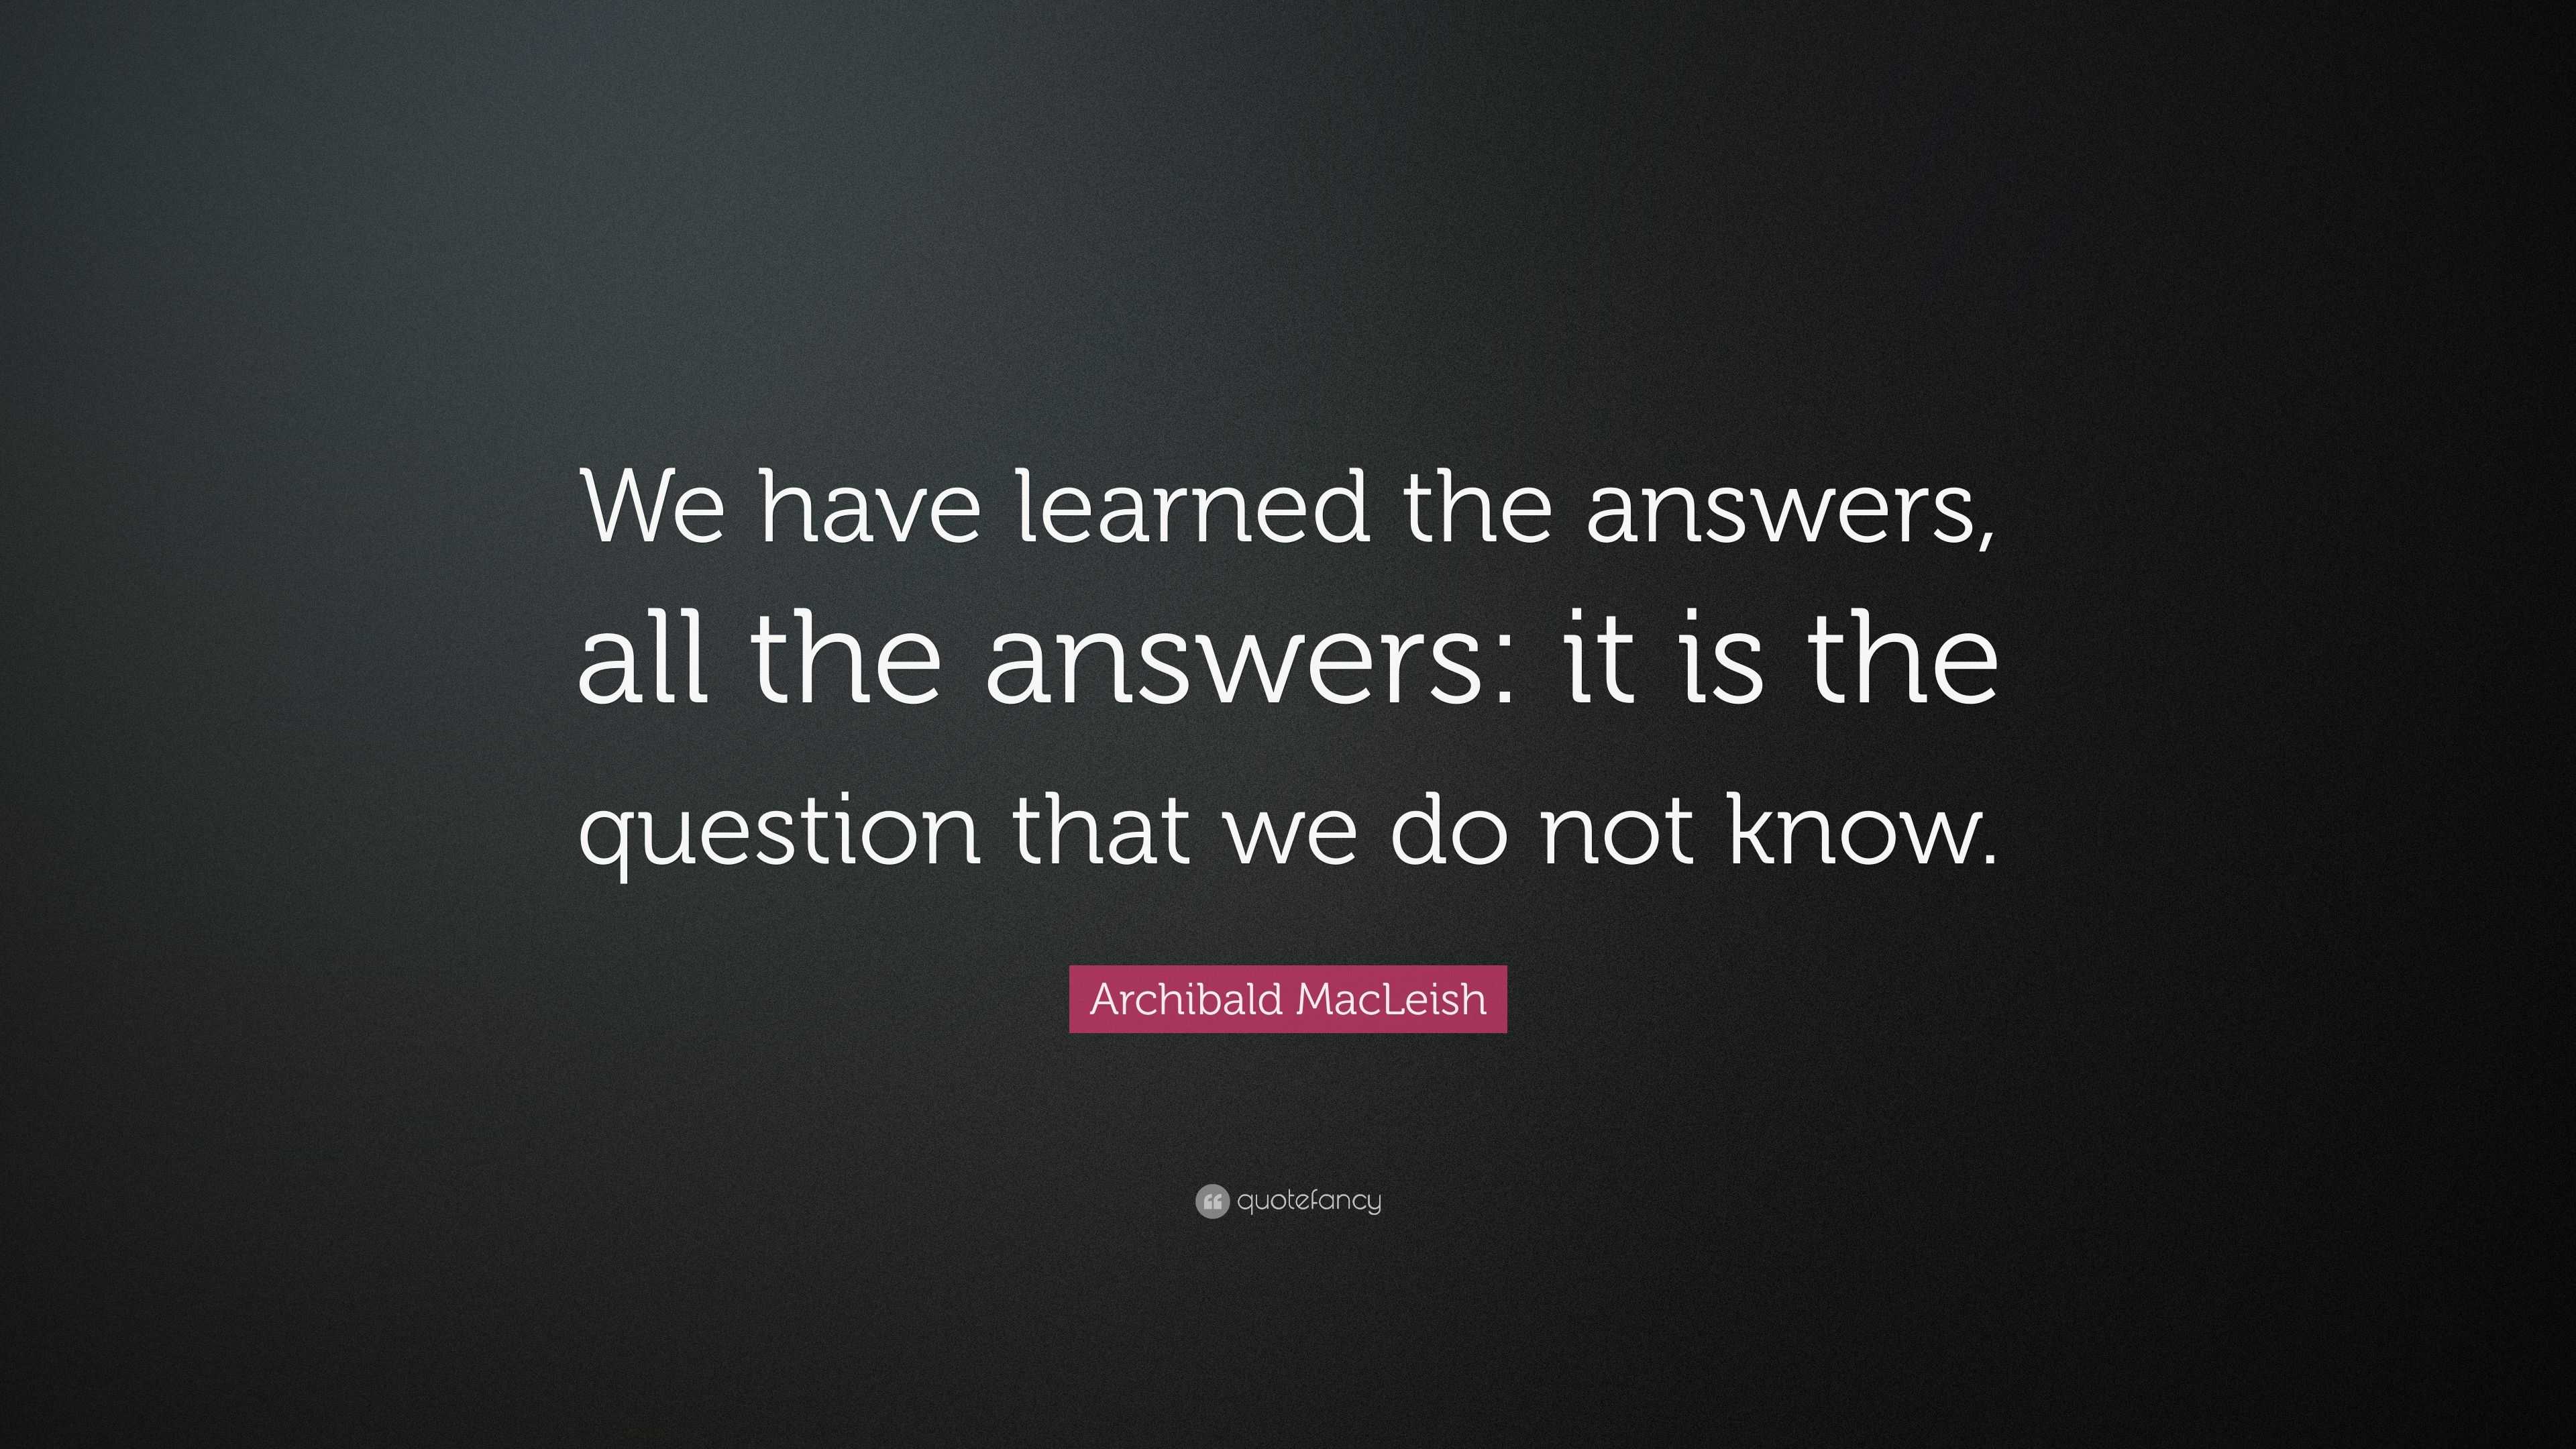 Archibald MacLeish Quote: “We have learned the answers, all the answers ...